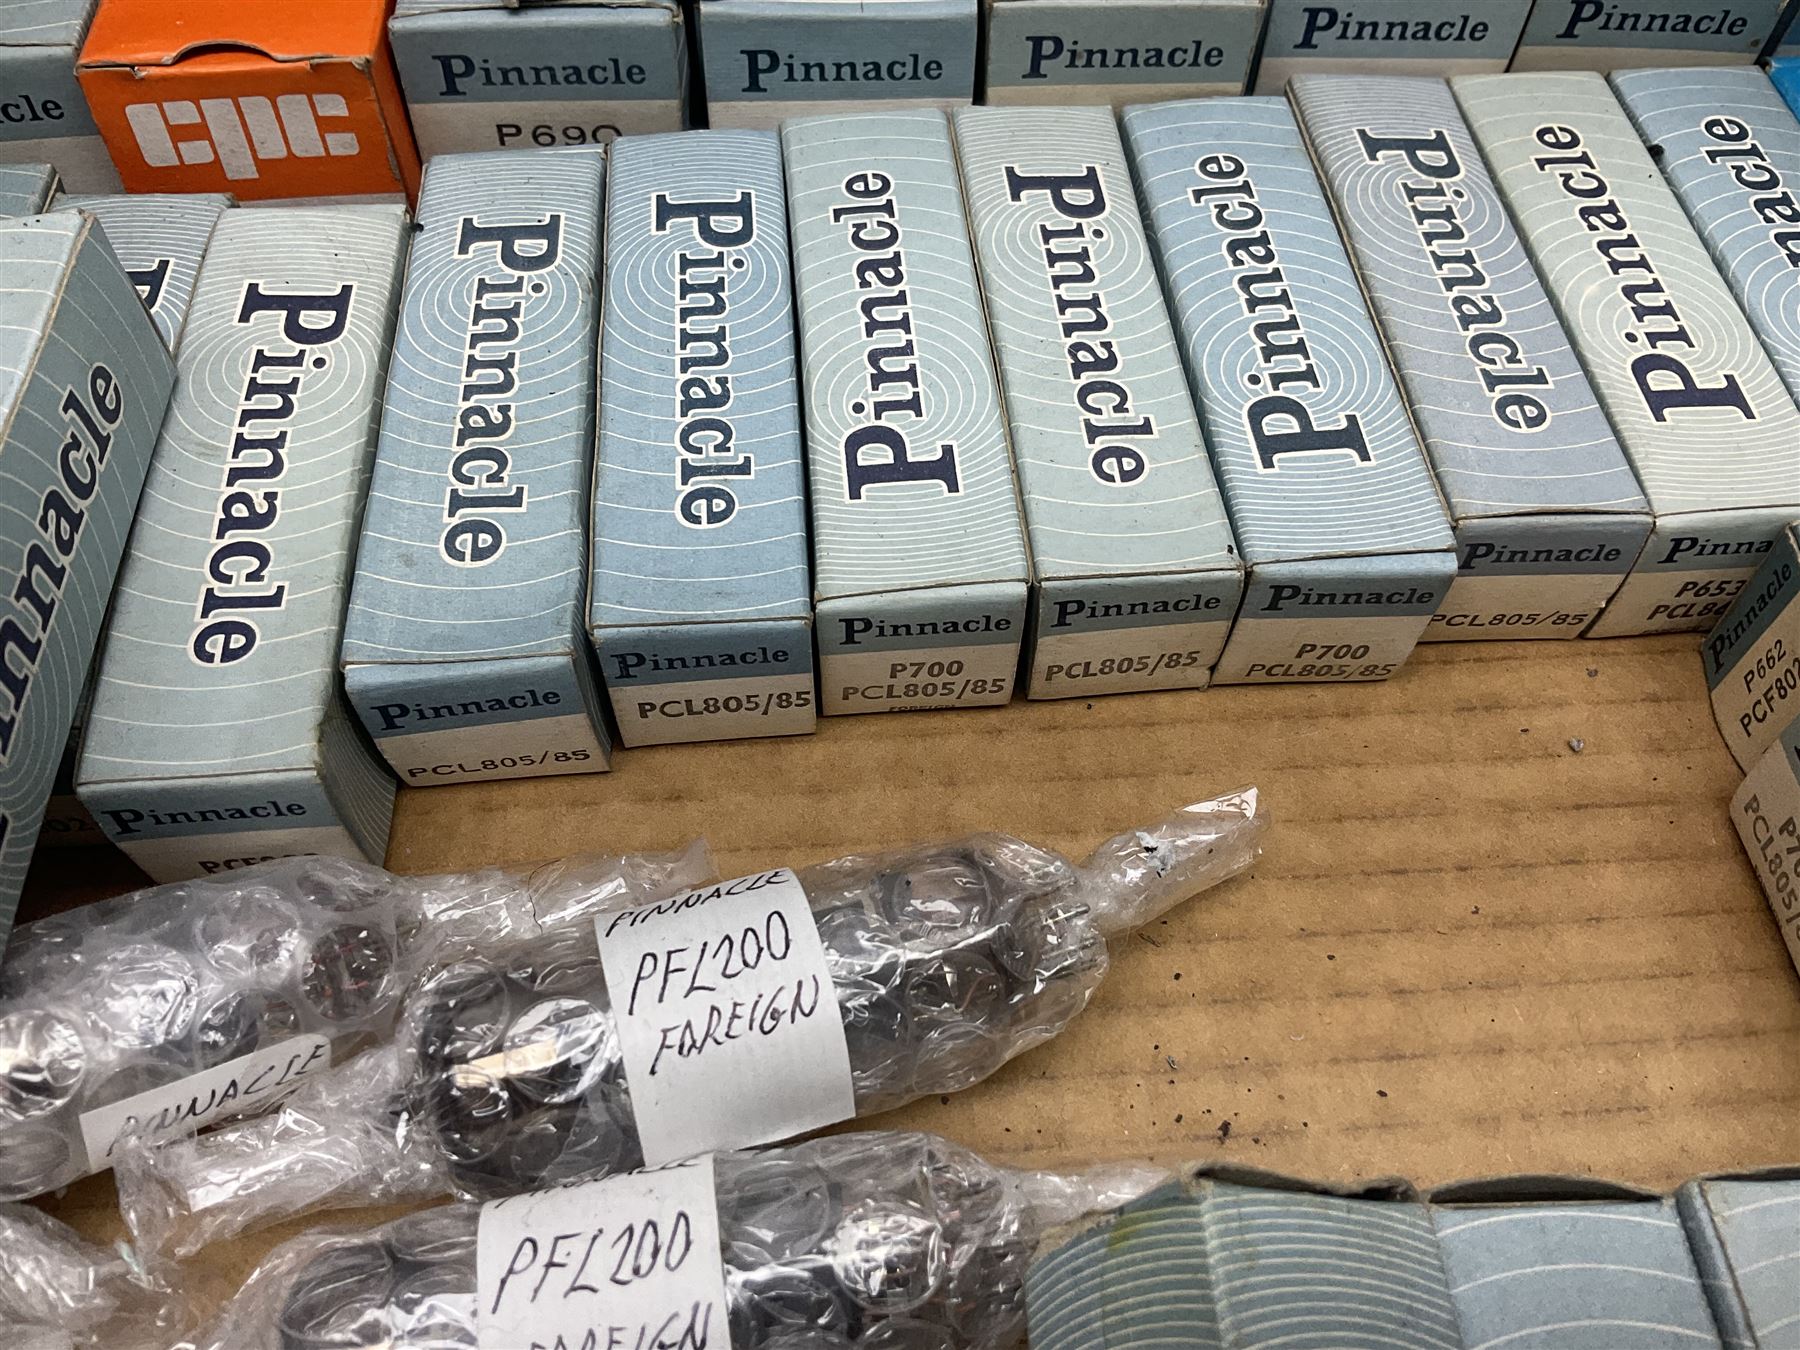 Collection of Pinnacle thermionic radio valves/vacuum tubes including PL509 - Image 7 of 10